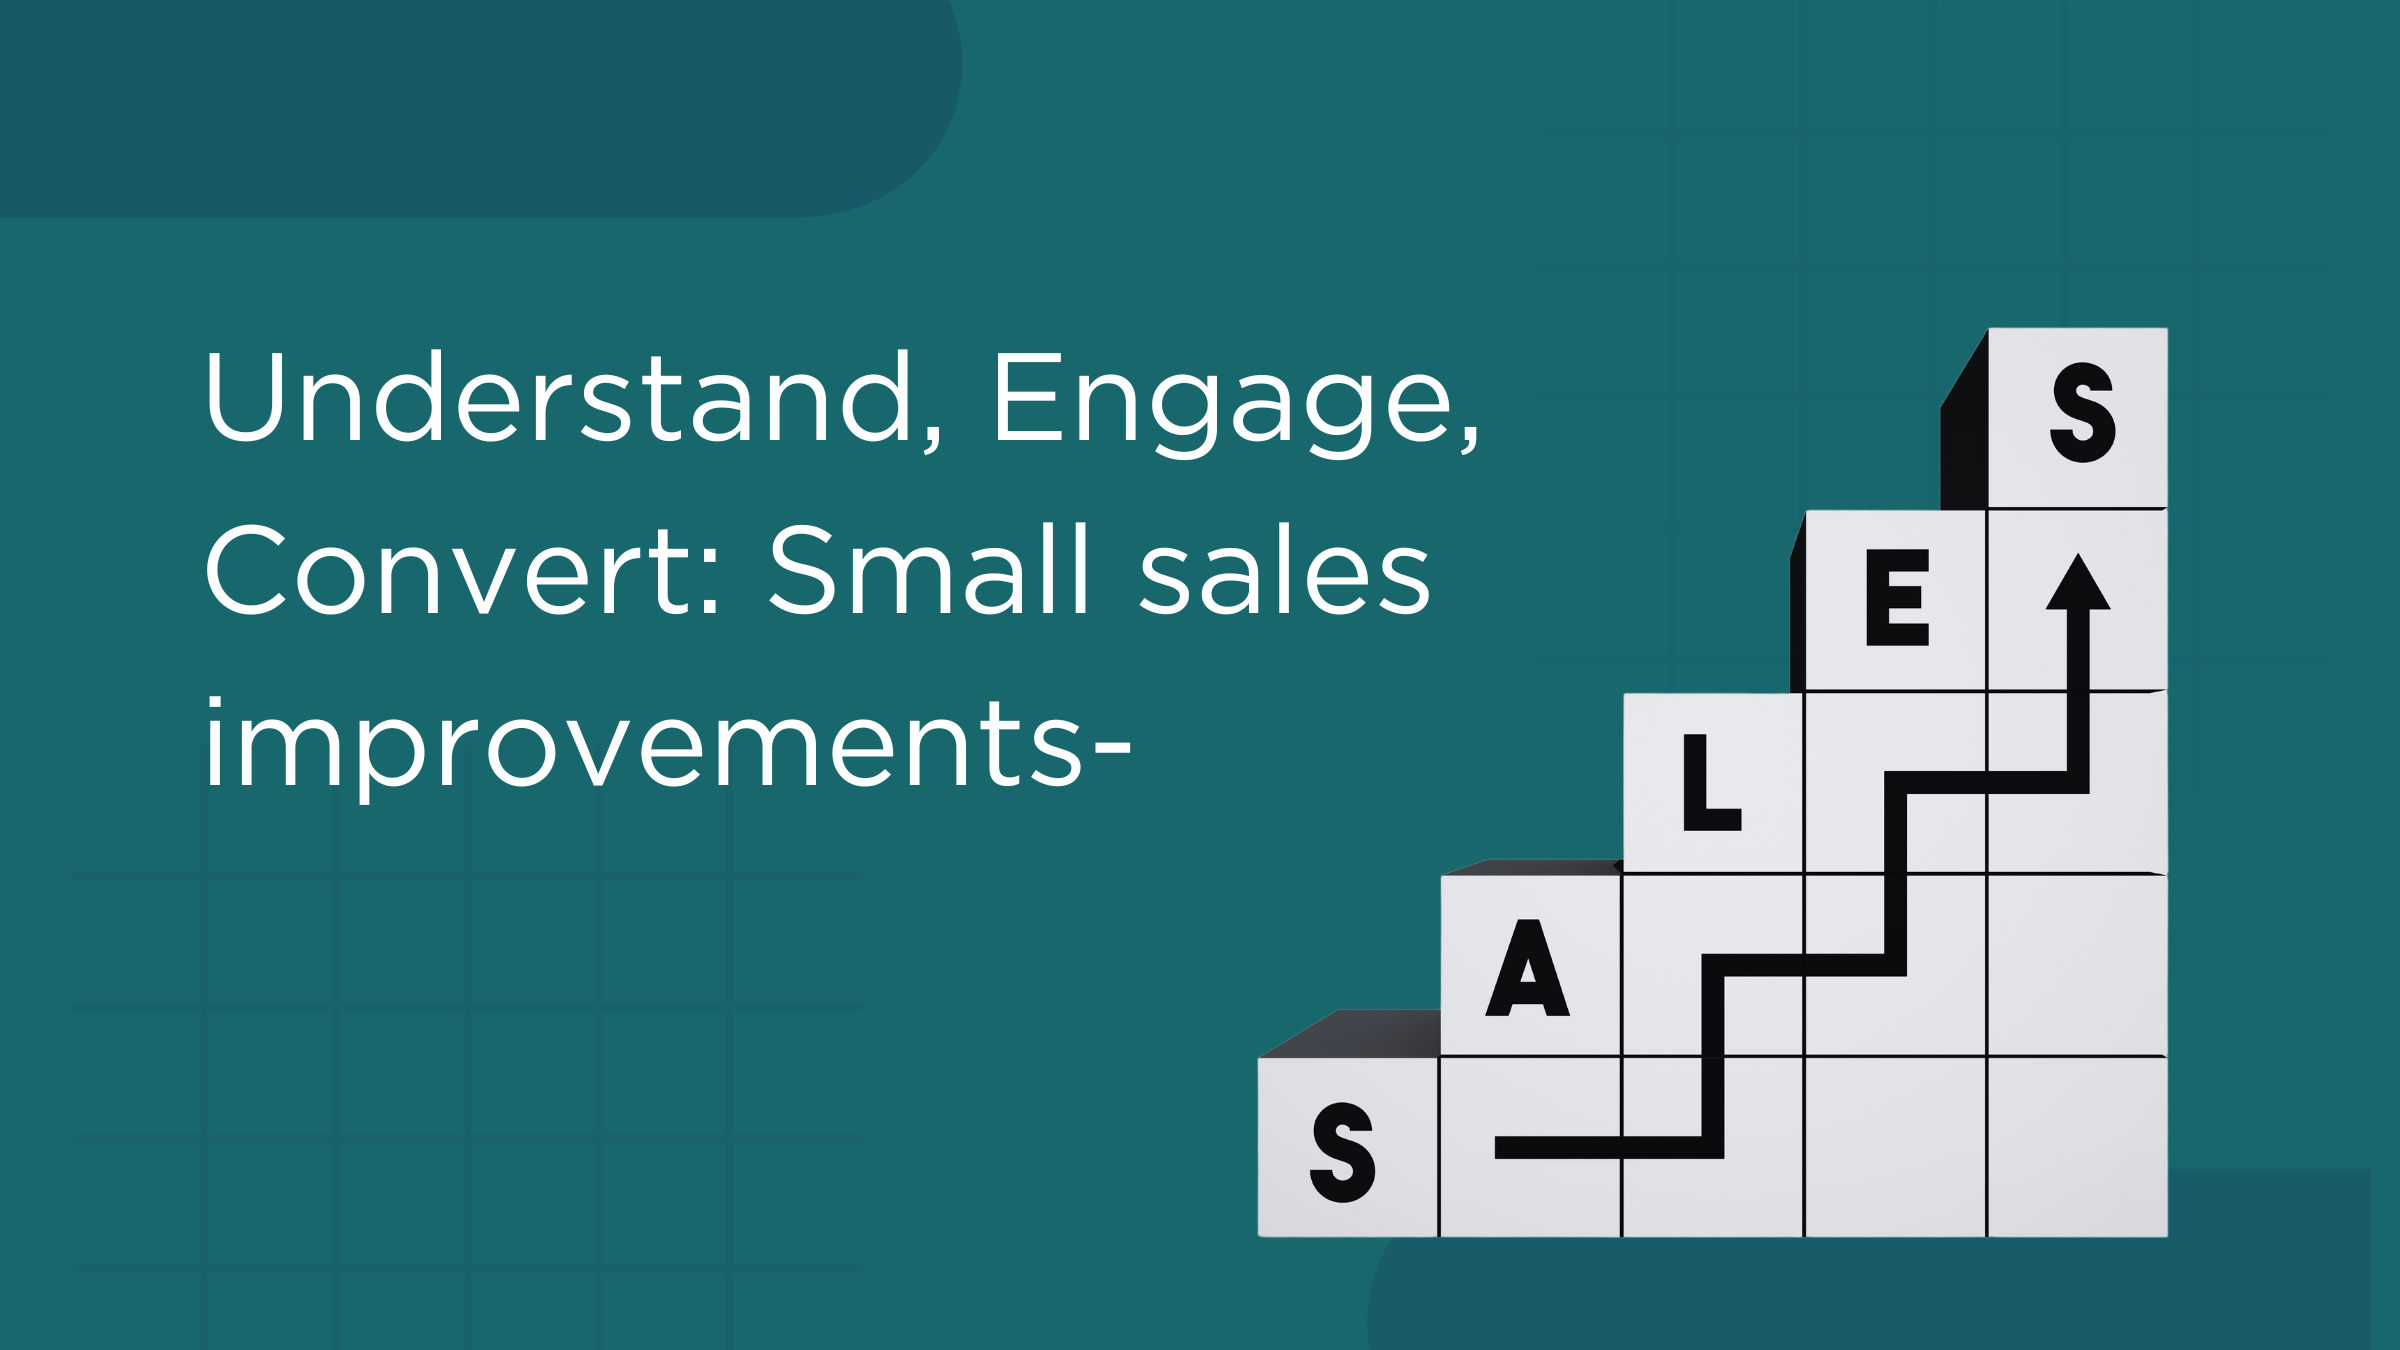 Understand, Engage, Convert: Small sales improvements-